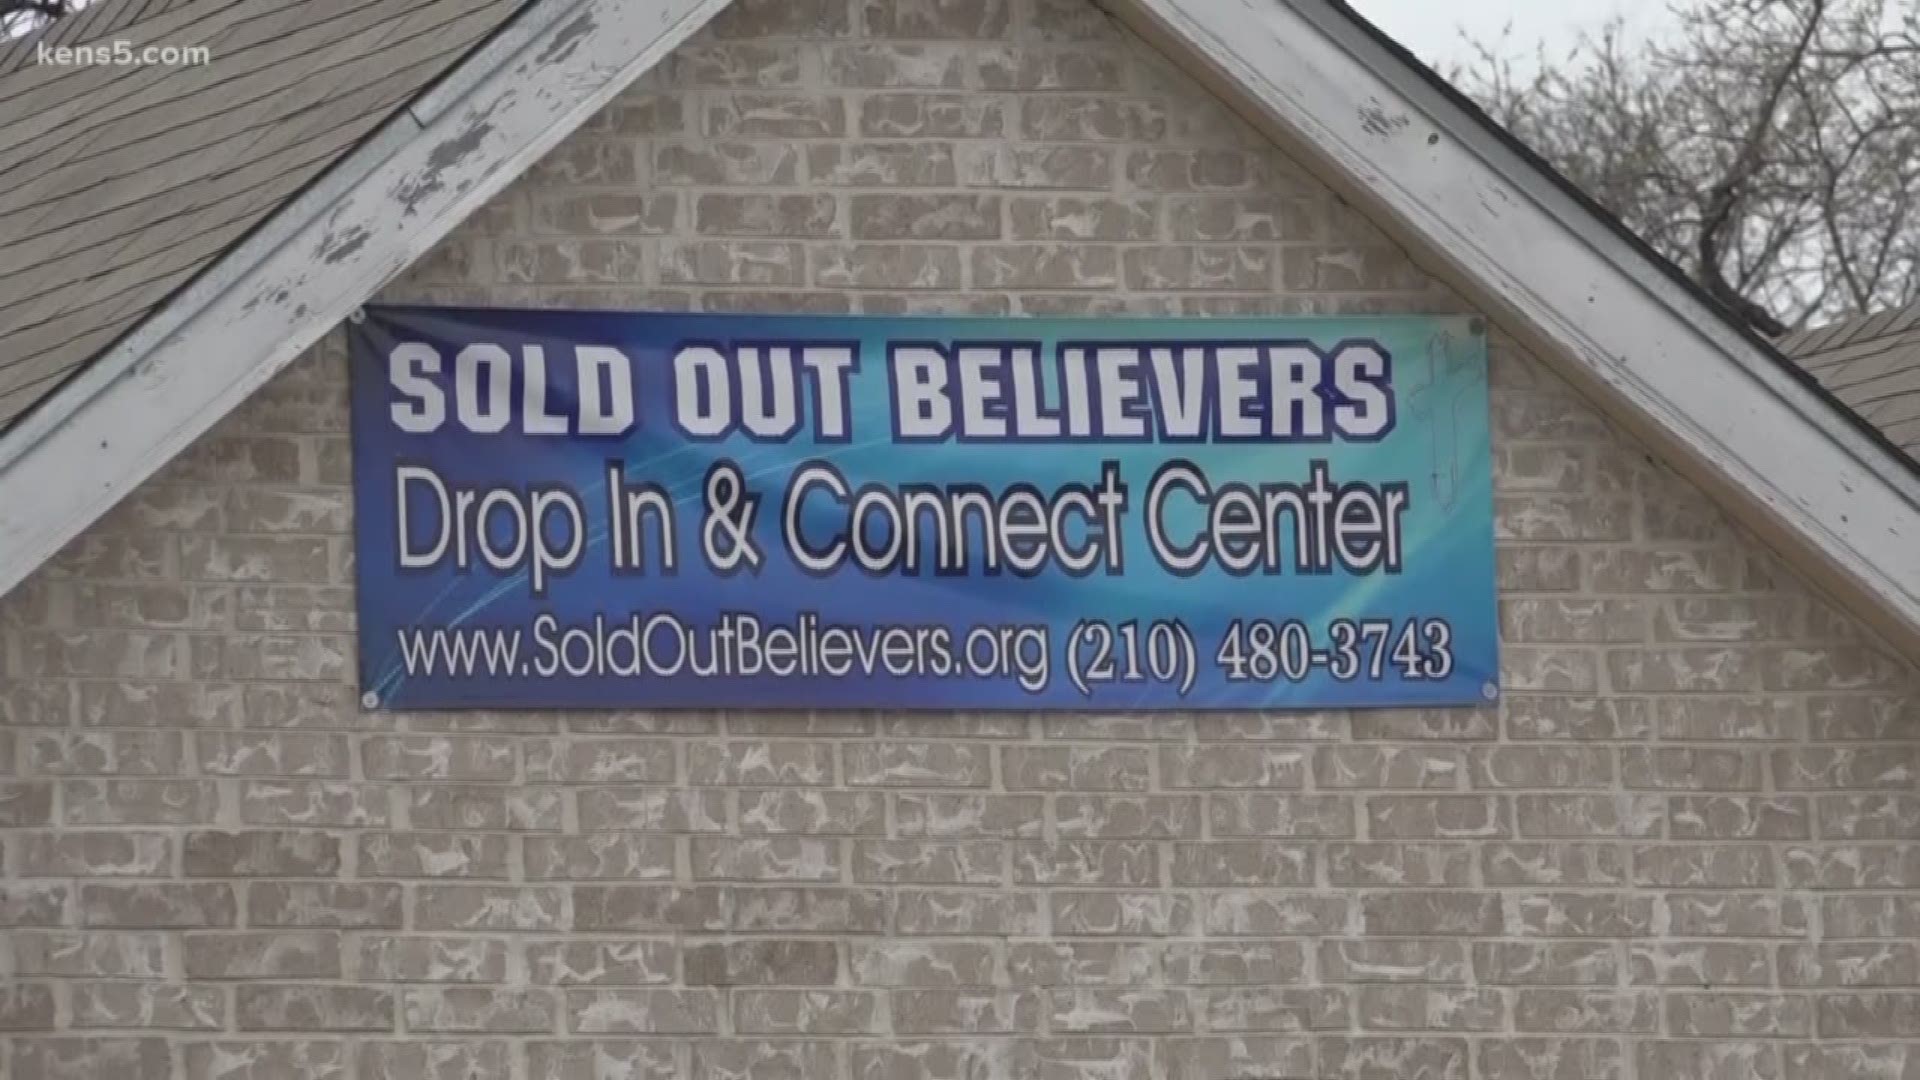 Volunteers of Sold Out Believers Drop-in & Connect Center are working around the clock to provide shelter, food, warmth and hope to men and women who normally spend their nights on the streets. Eyewitness News reporter Jon Coker explains.